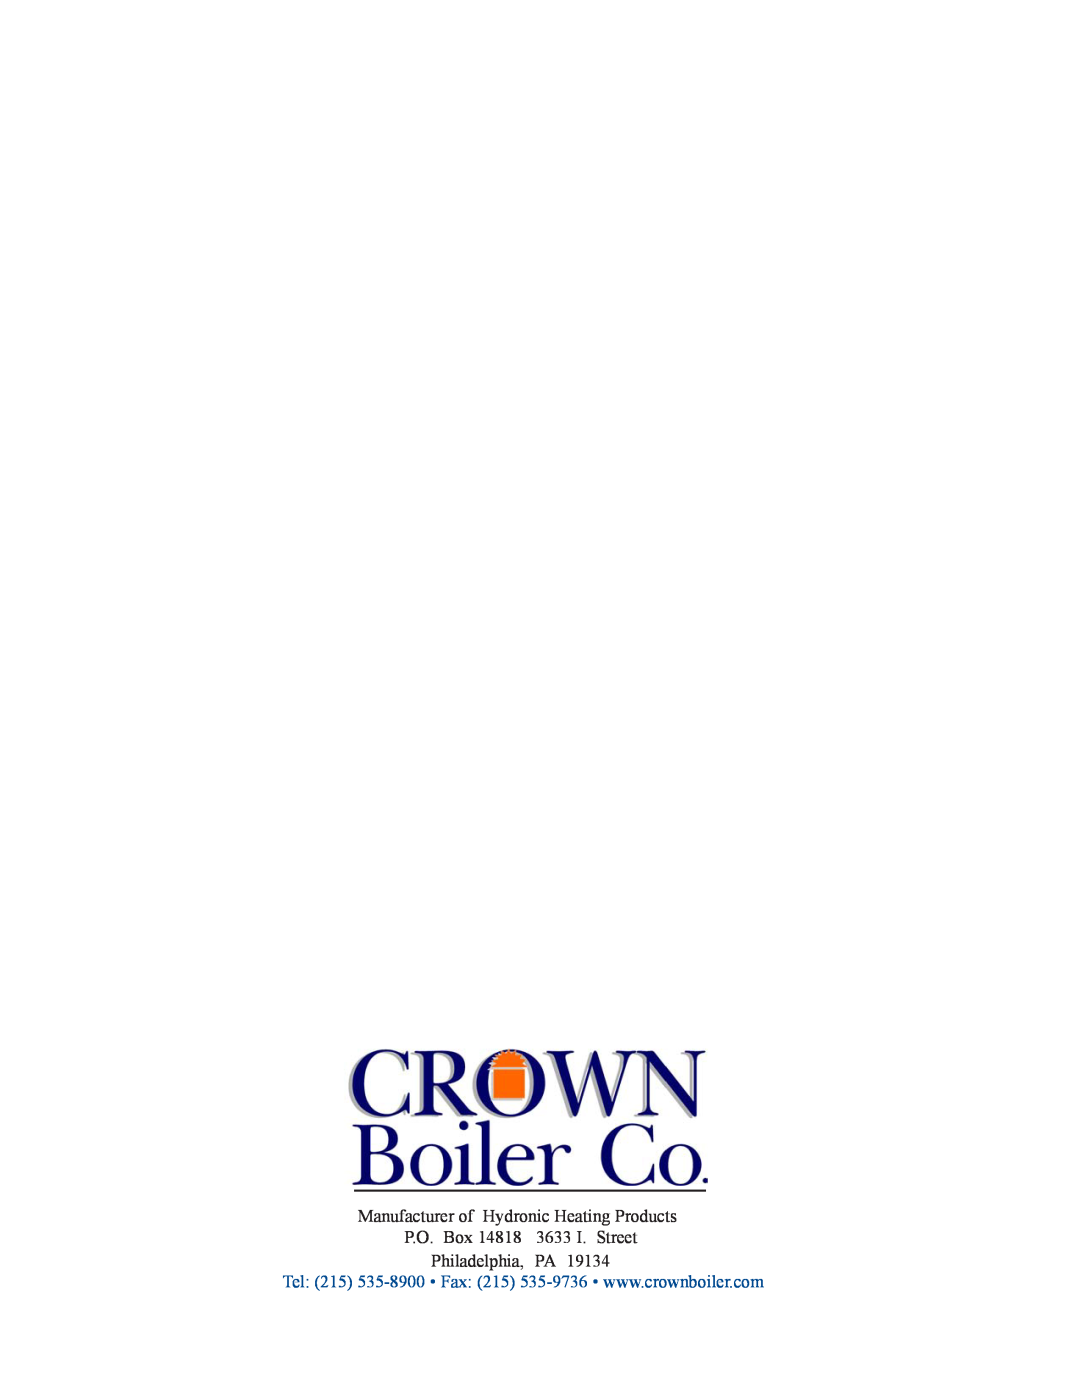 Crown Boiler CWI345, CWI172, CWI310 Manufacturer of Hydronic Heating Products, P.O. Box, 3633 I. Street, Philadelphia 